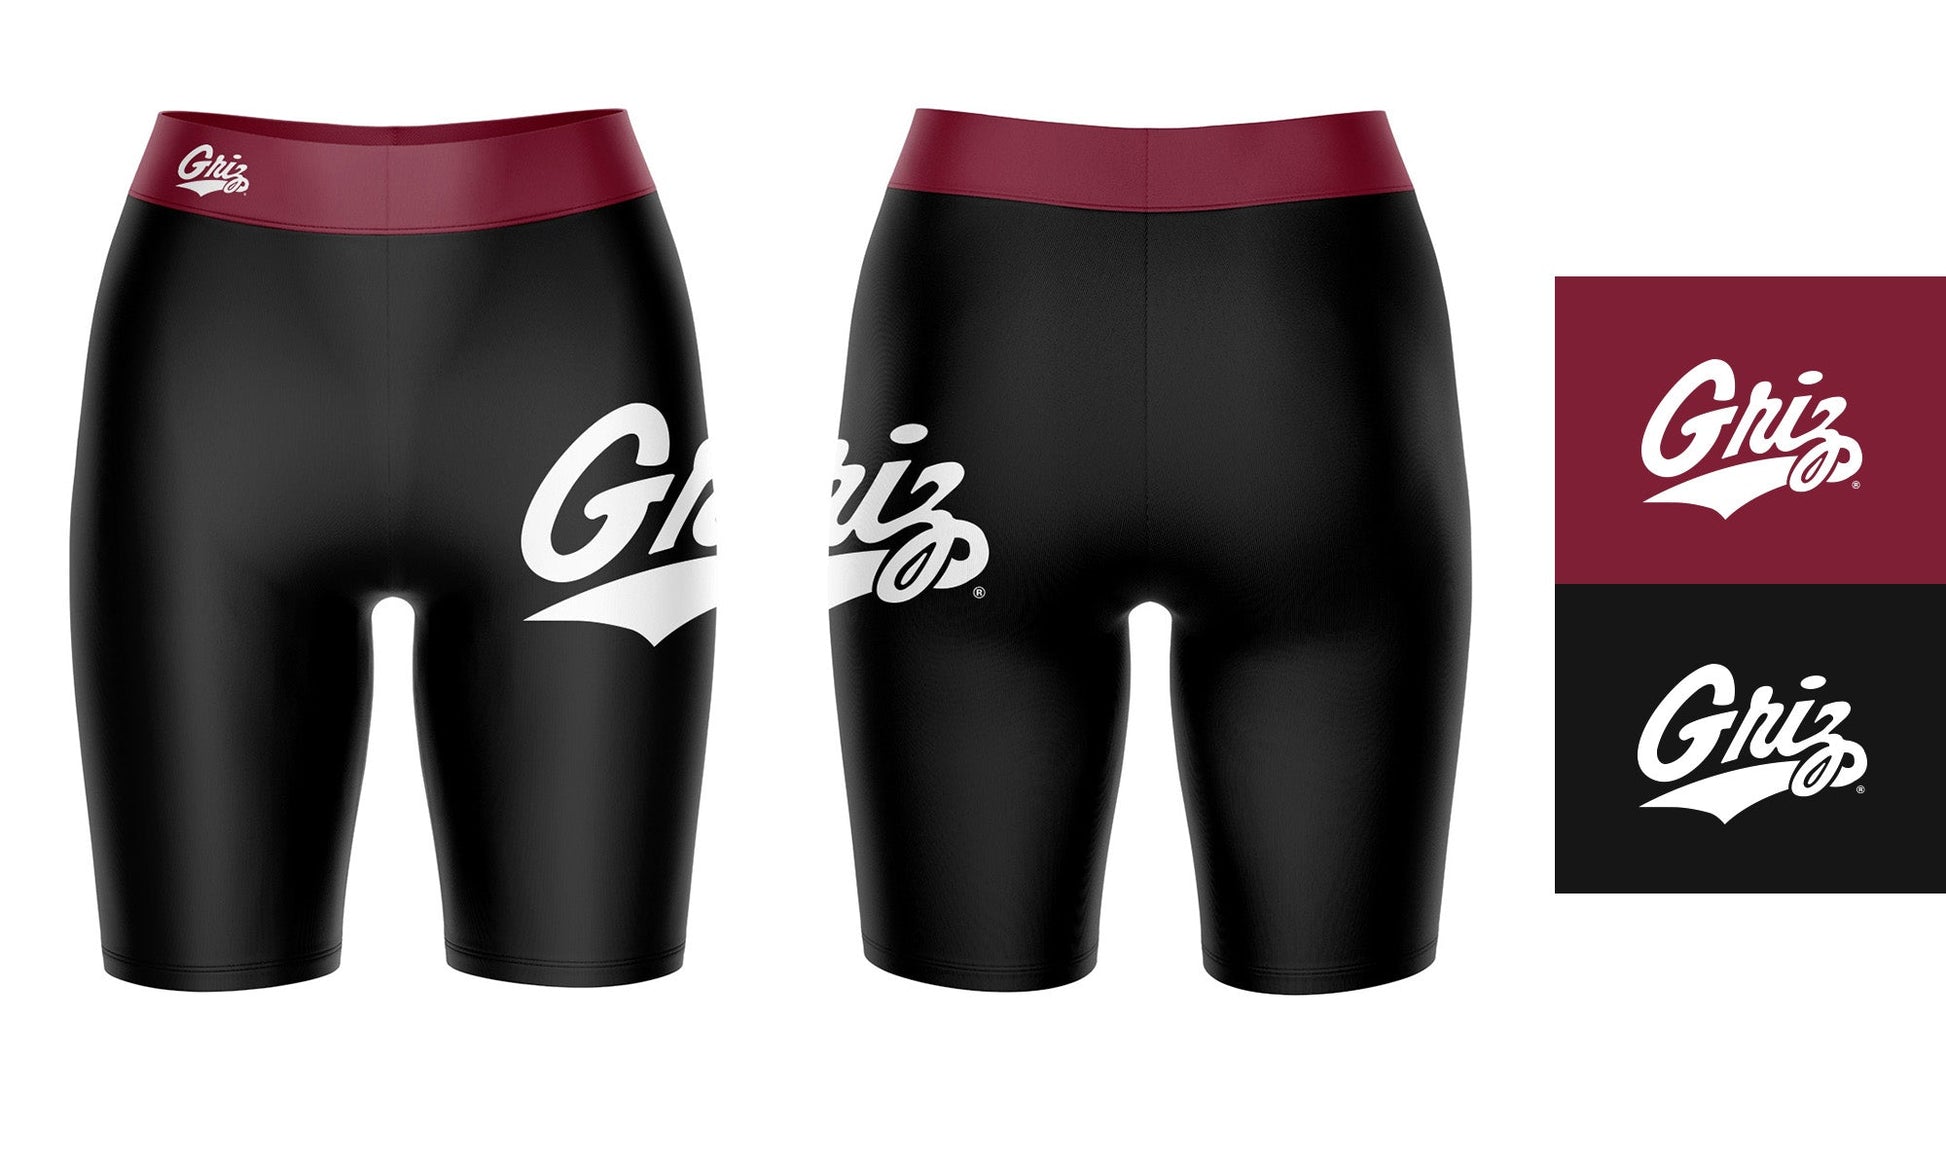 Montana Grizzlies UMT Vive La Fete Game Day Logo on Thigh and Waistband Black and Maroon Women Bike Short 9 Inseam"